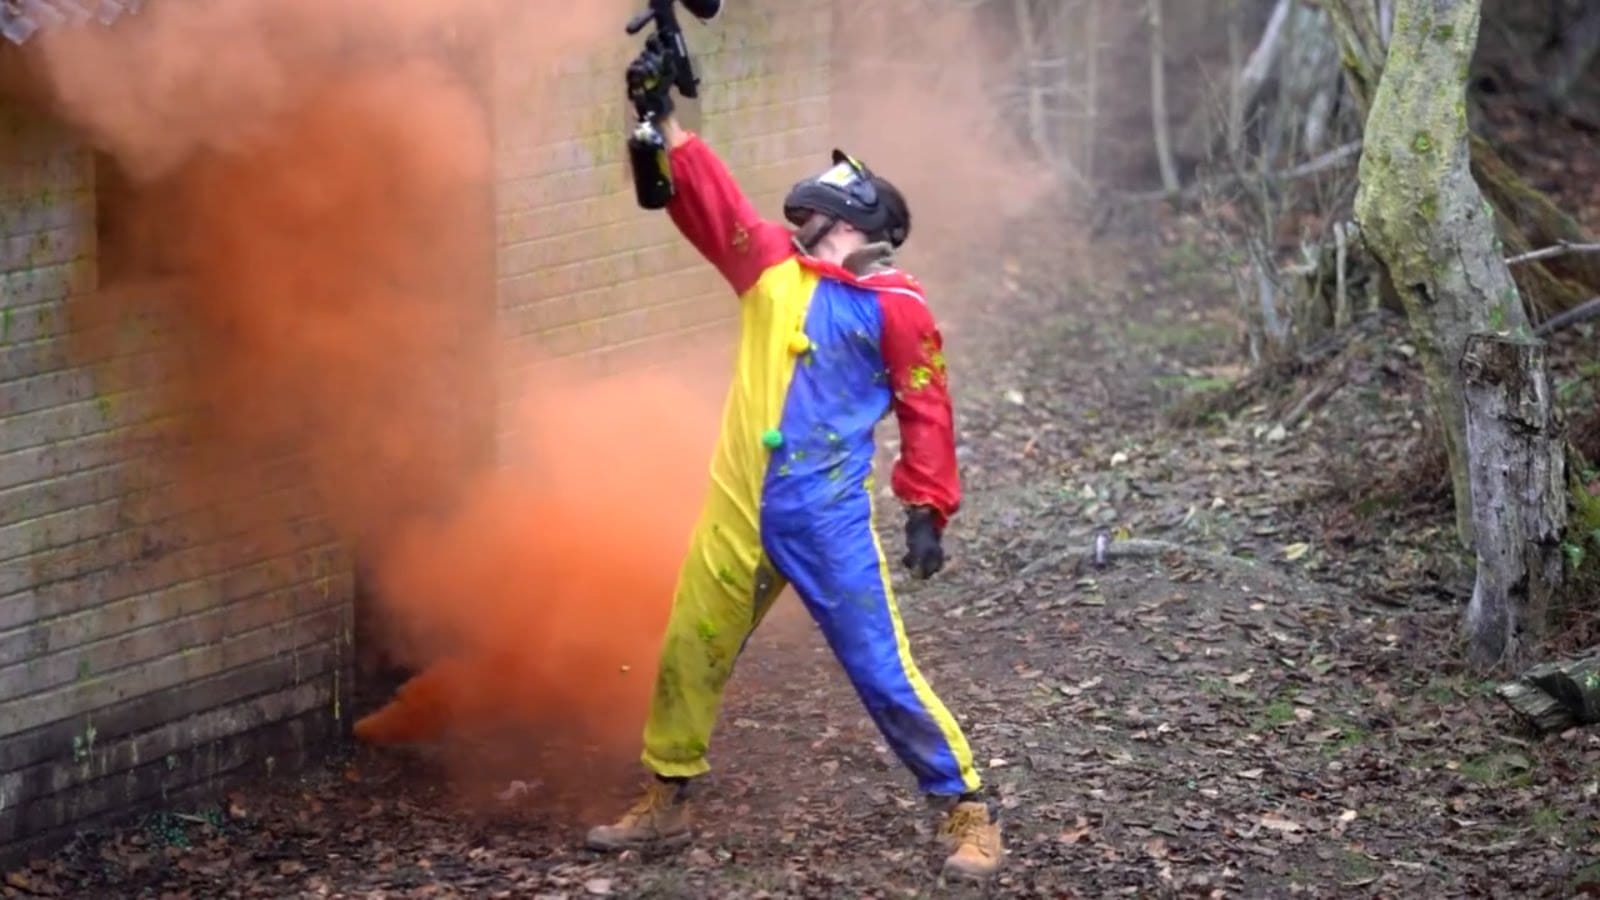 PAINTBALL DARE - 100 Shots in 10 Seconds